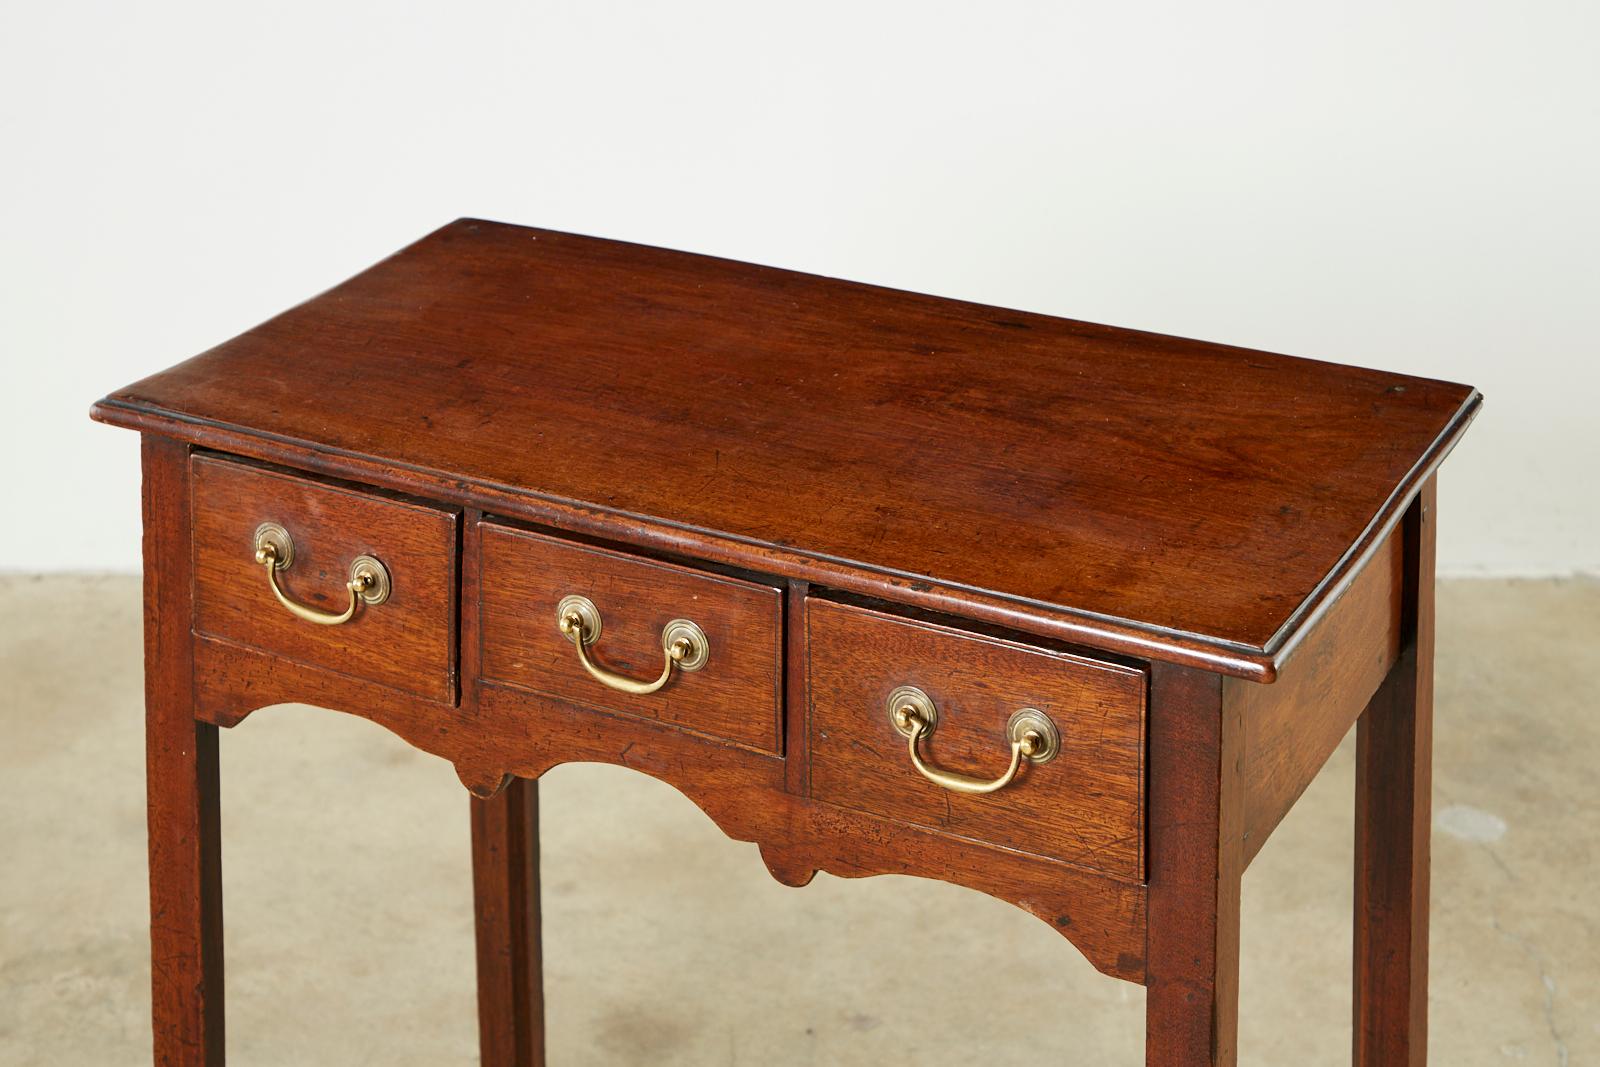 Hand-Crafted 19th Century Georgian Mahogany Dressing Table or Work Table